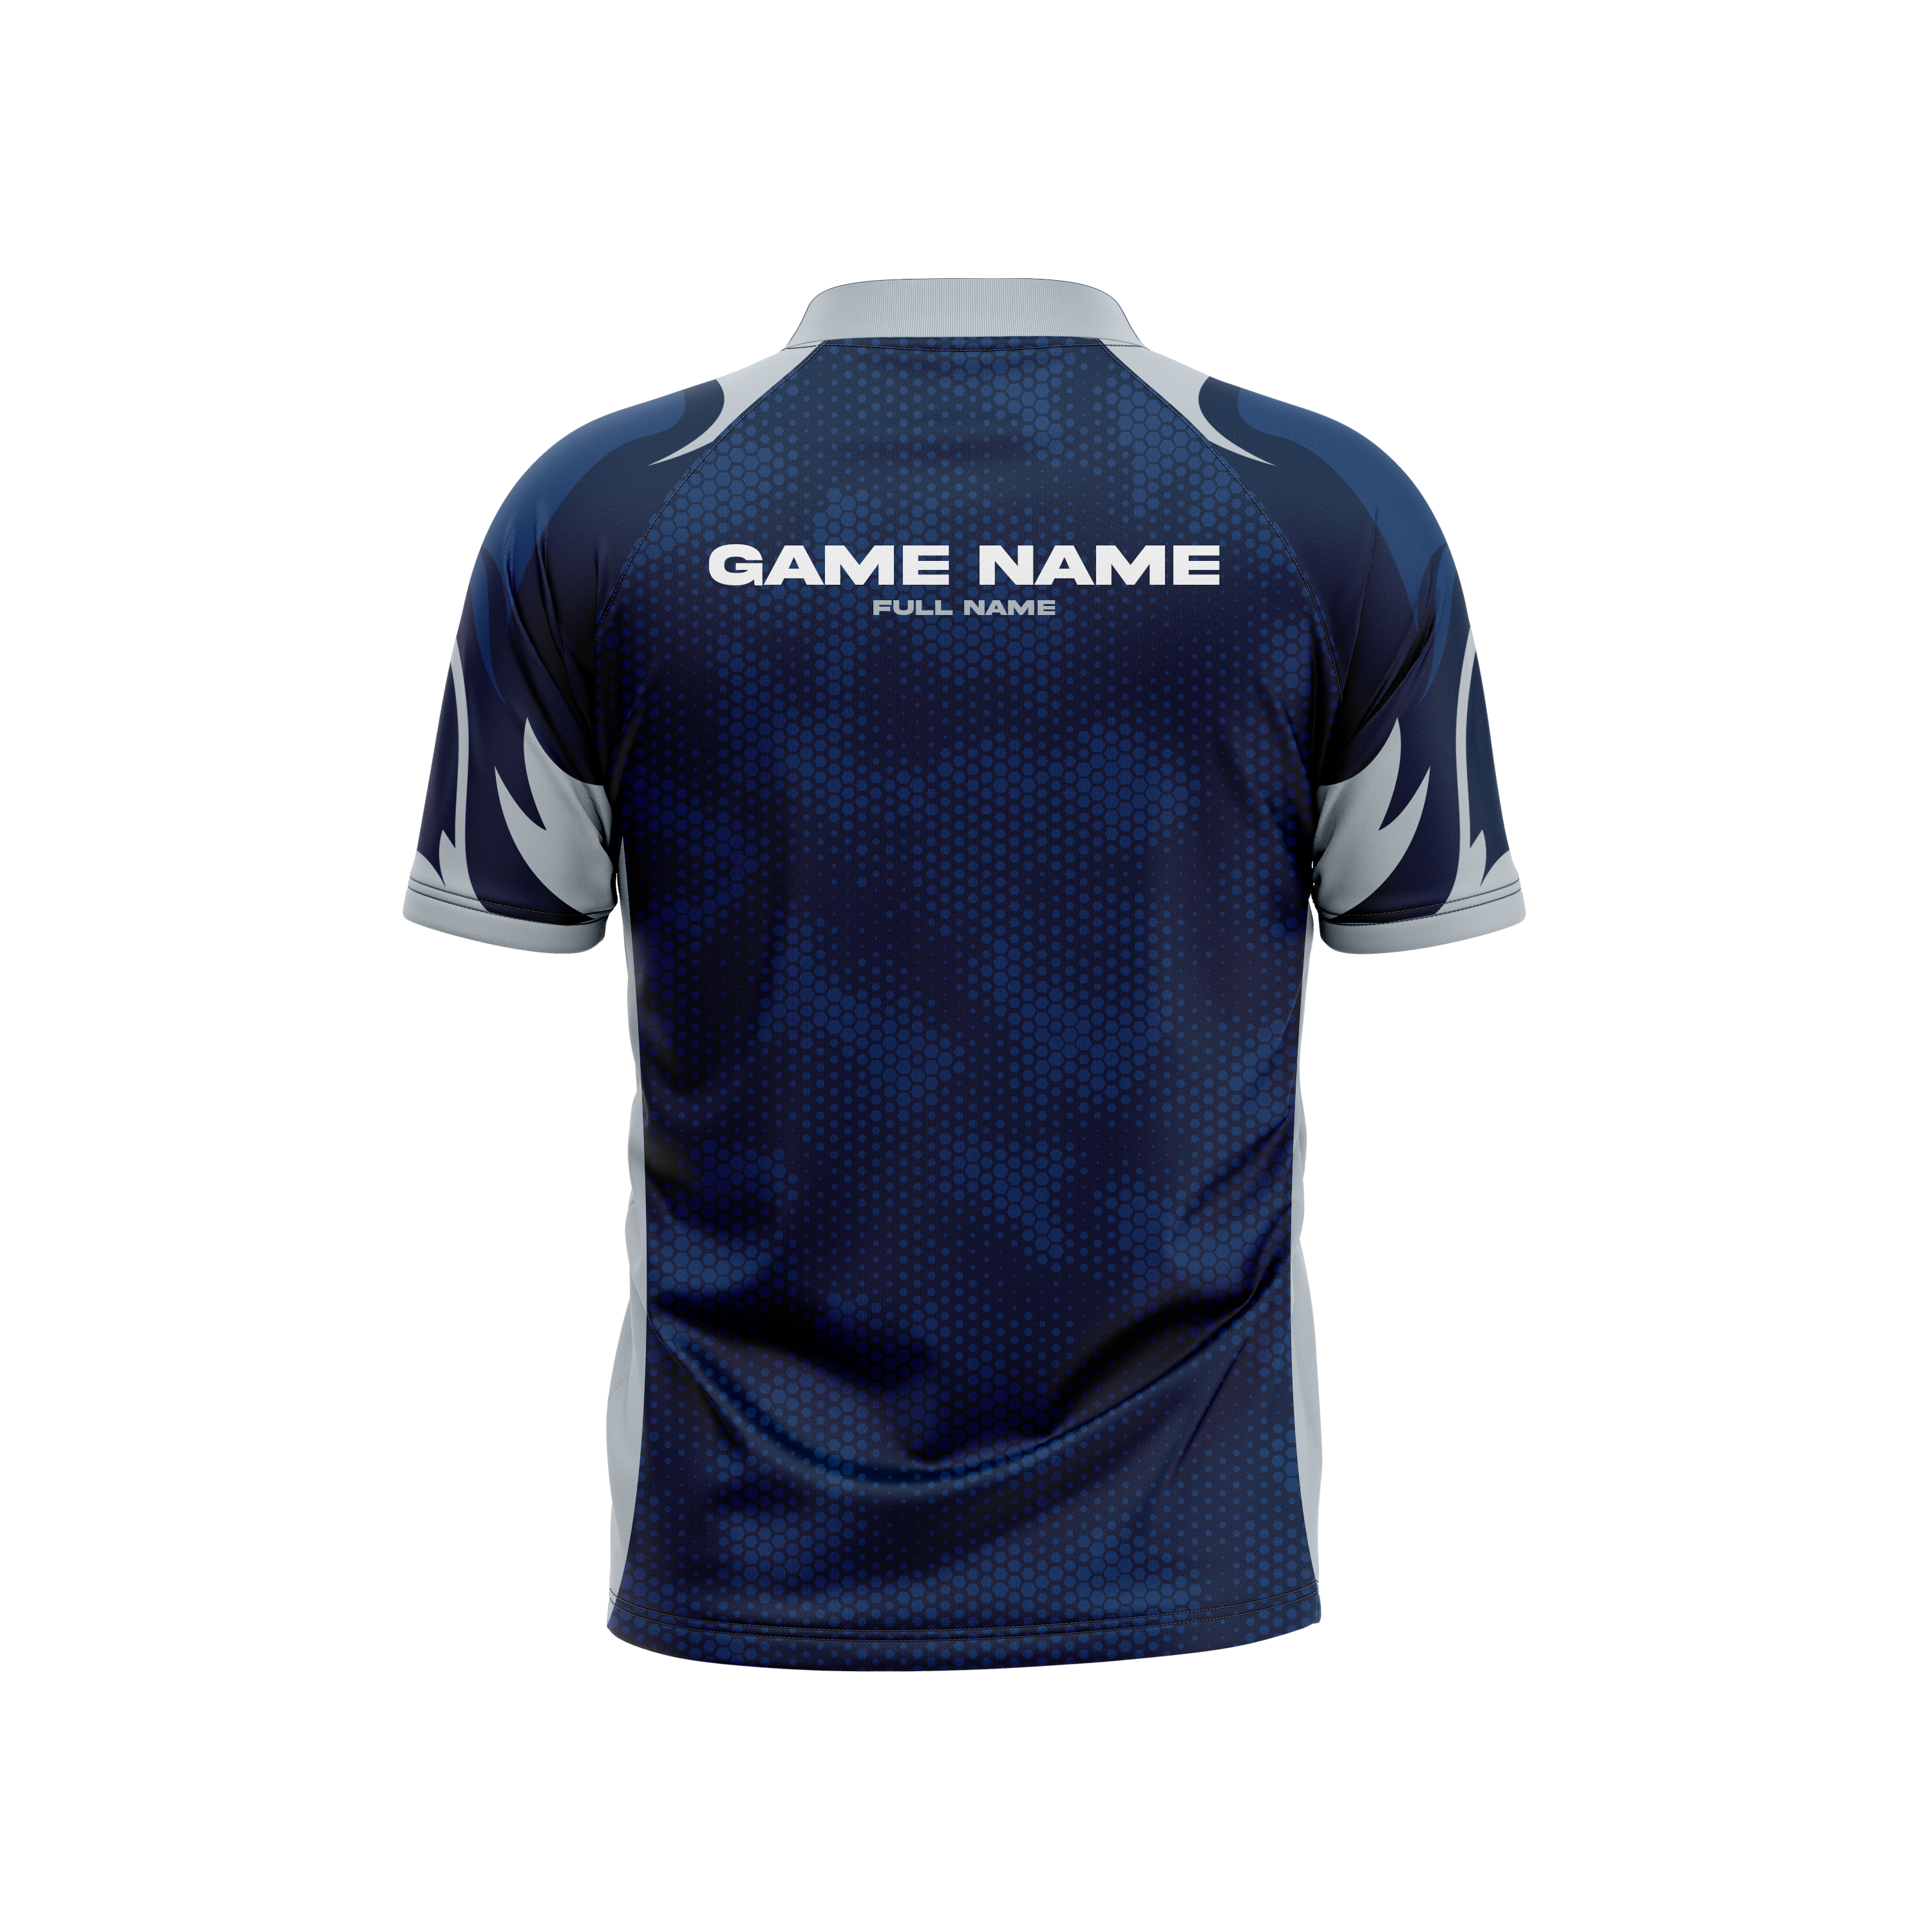 Fisher College | Immortal Series | Camo Jersey